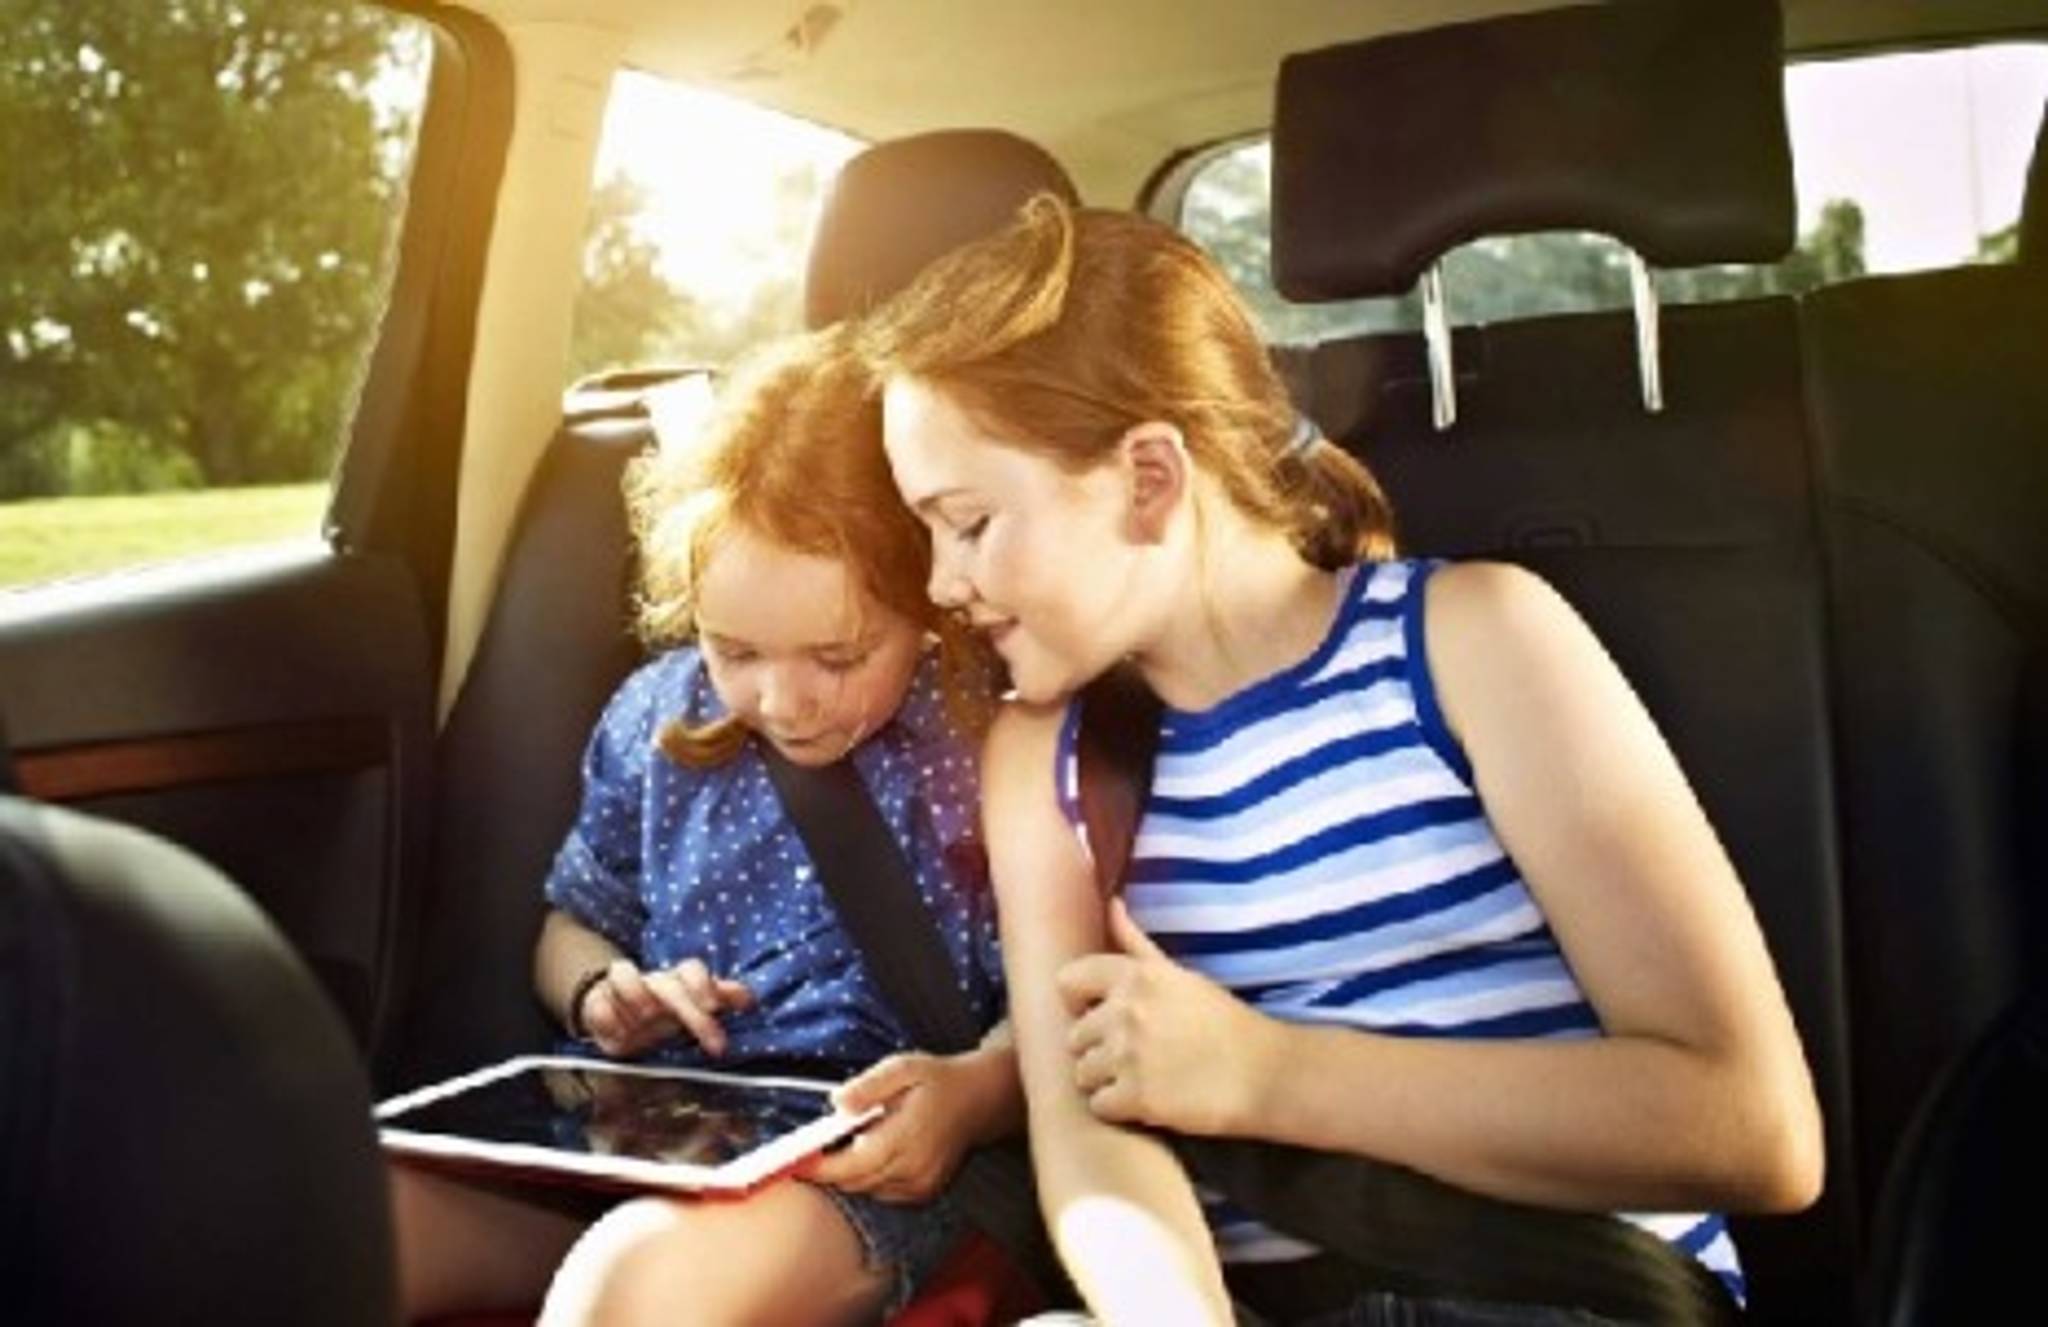 Shuddle is Uber for your kids